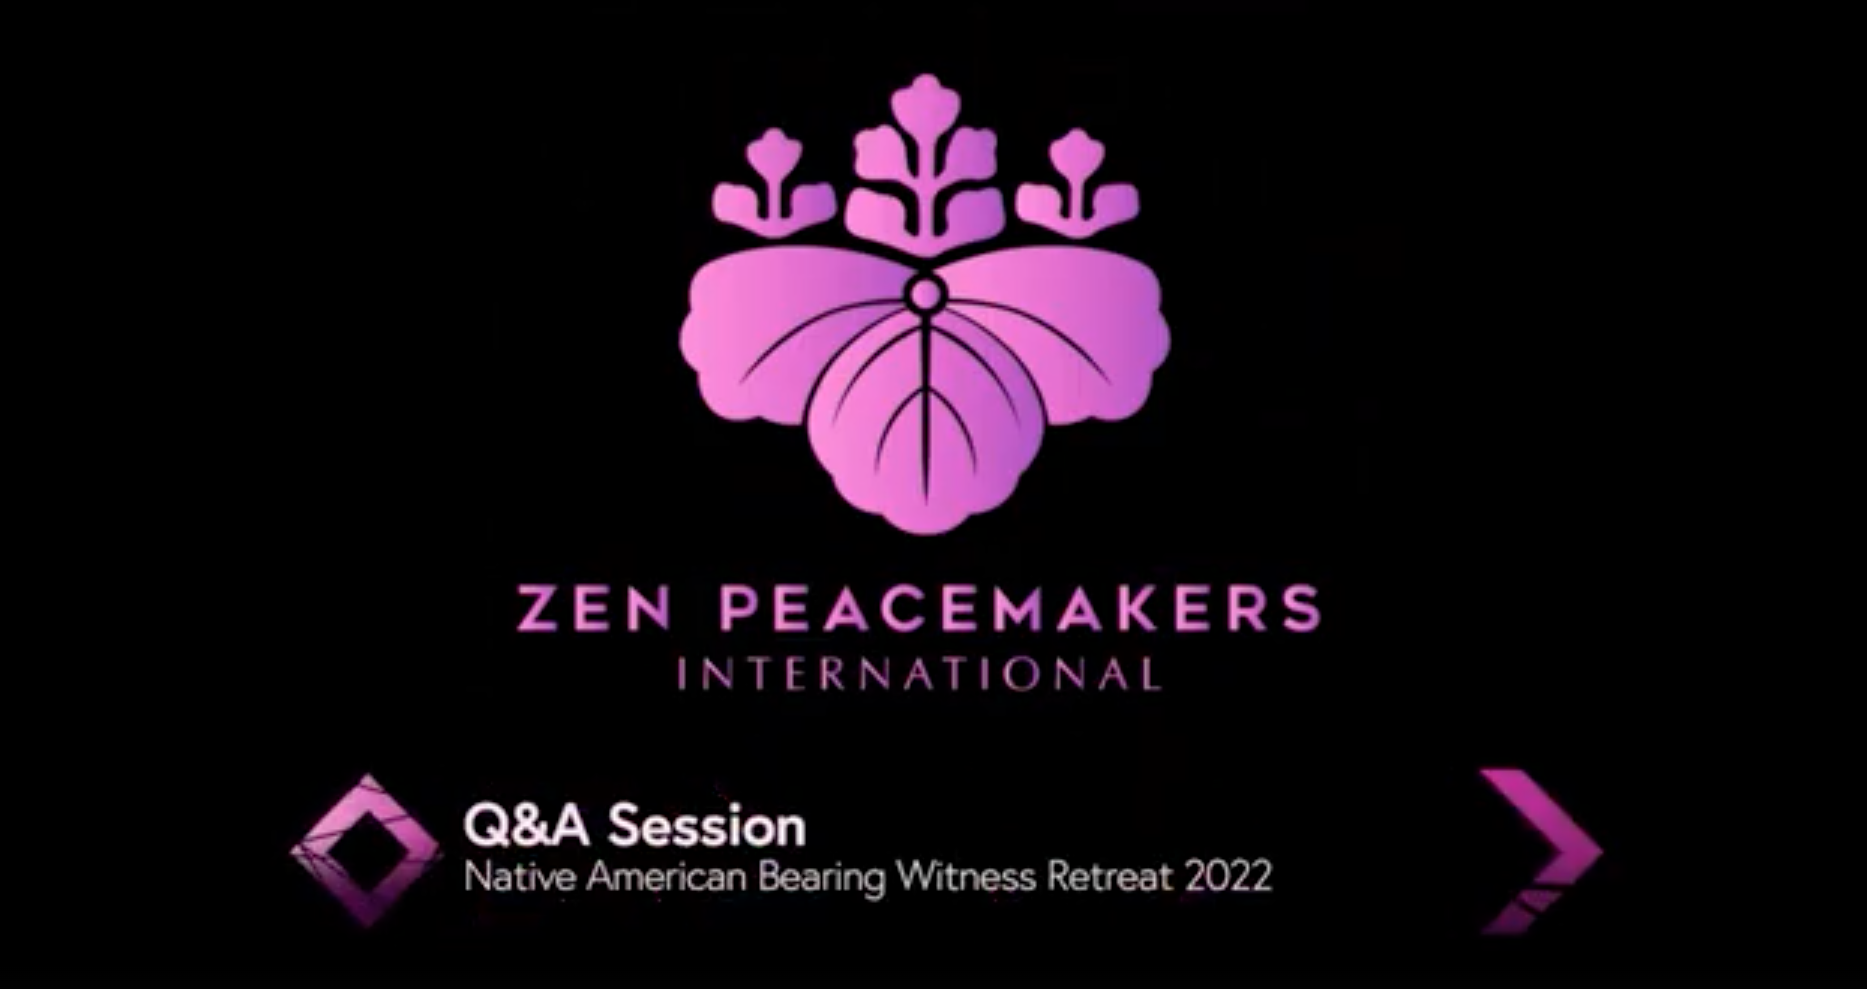 Q&A Session for Native American Bearing Witness Retreat 2022